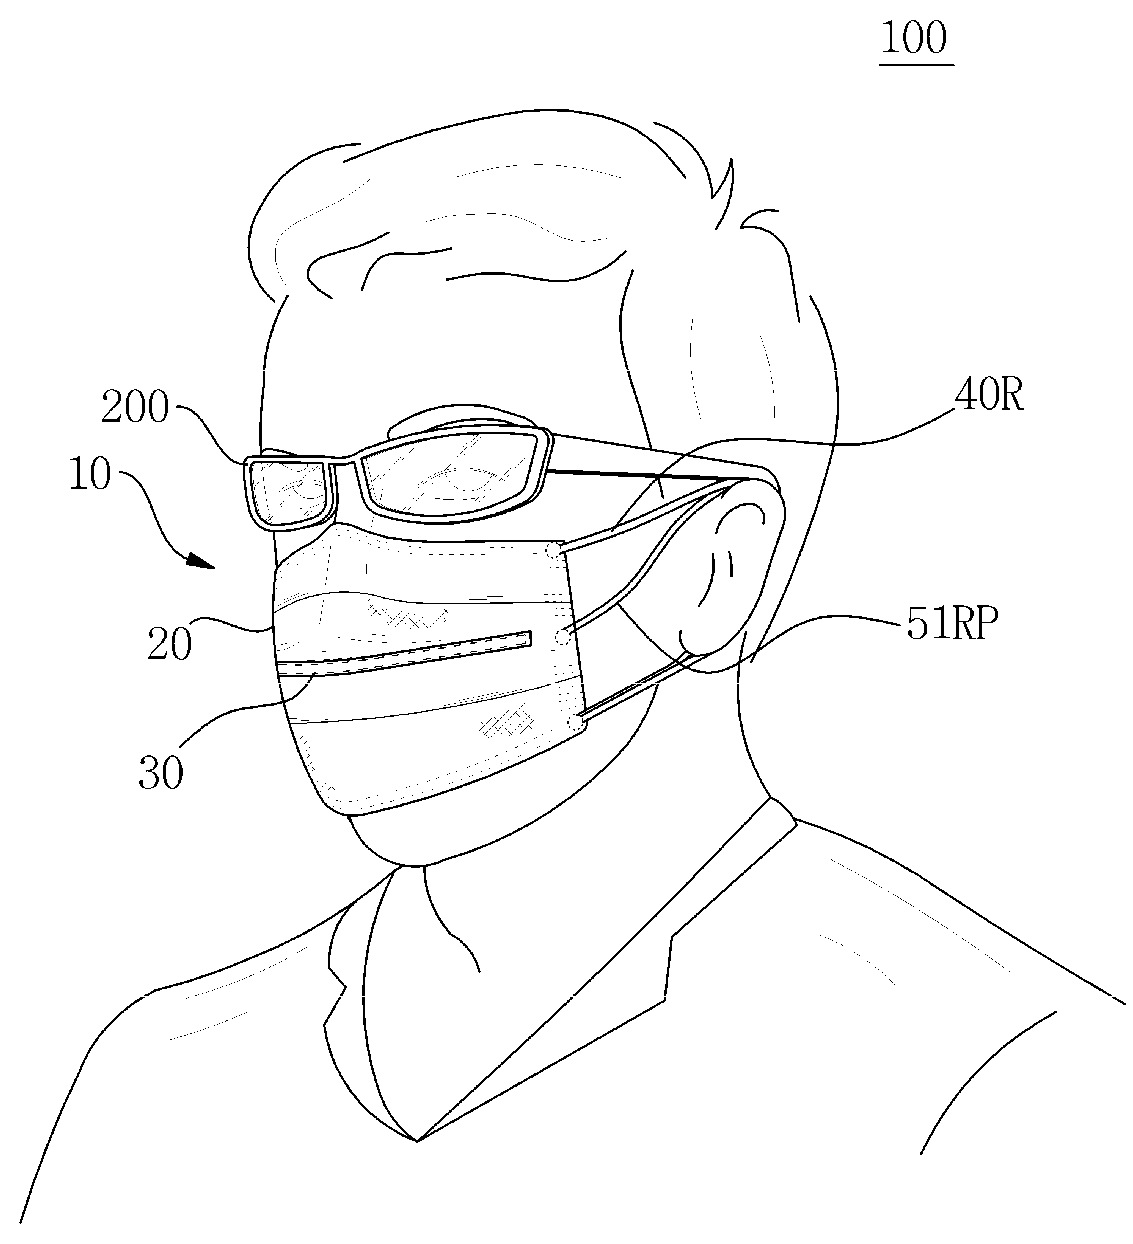 Anti-fog surgical mask with a middle vapor barrier